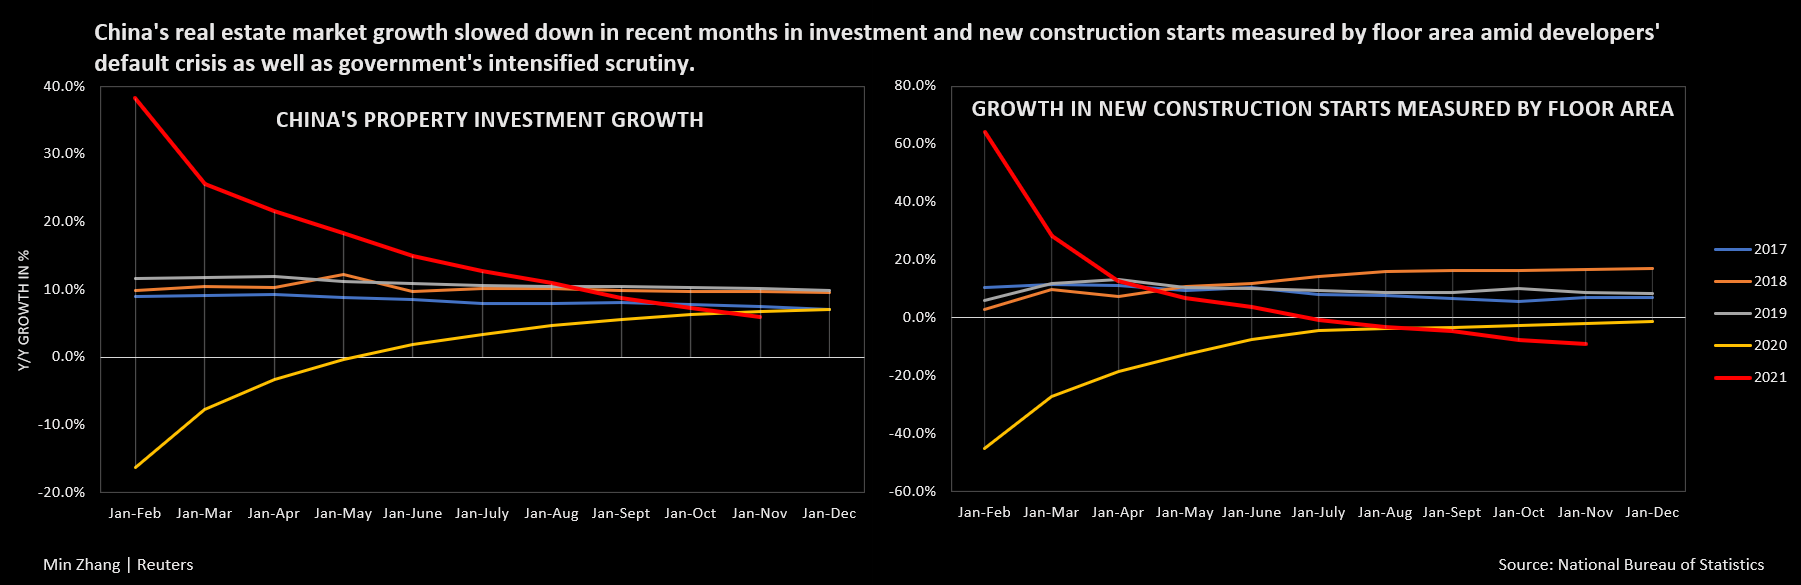 Growth in China's property investment and new construction starts measured by floor area fell in recent months amid developers' default crisis and government's controls.